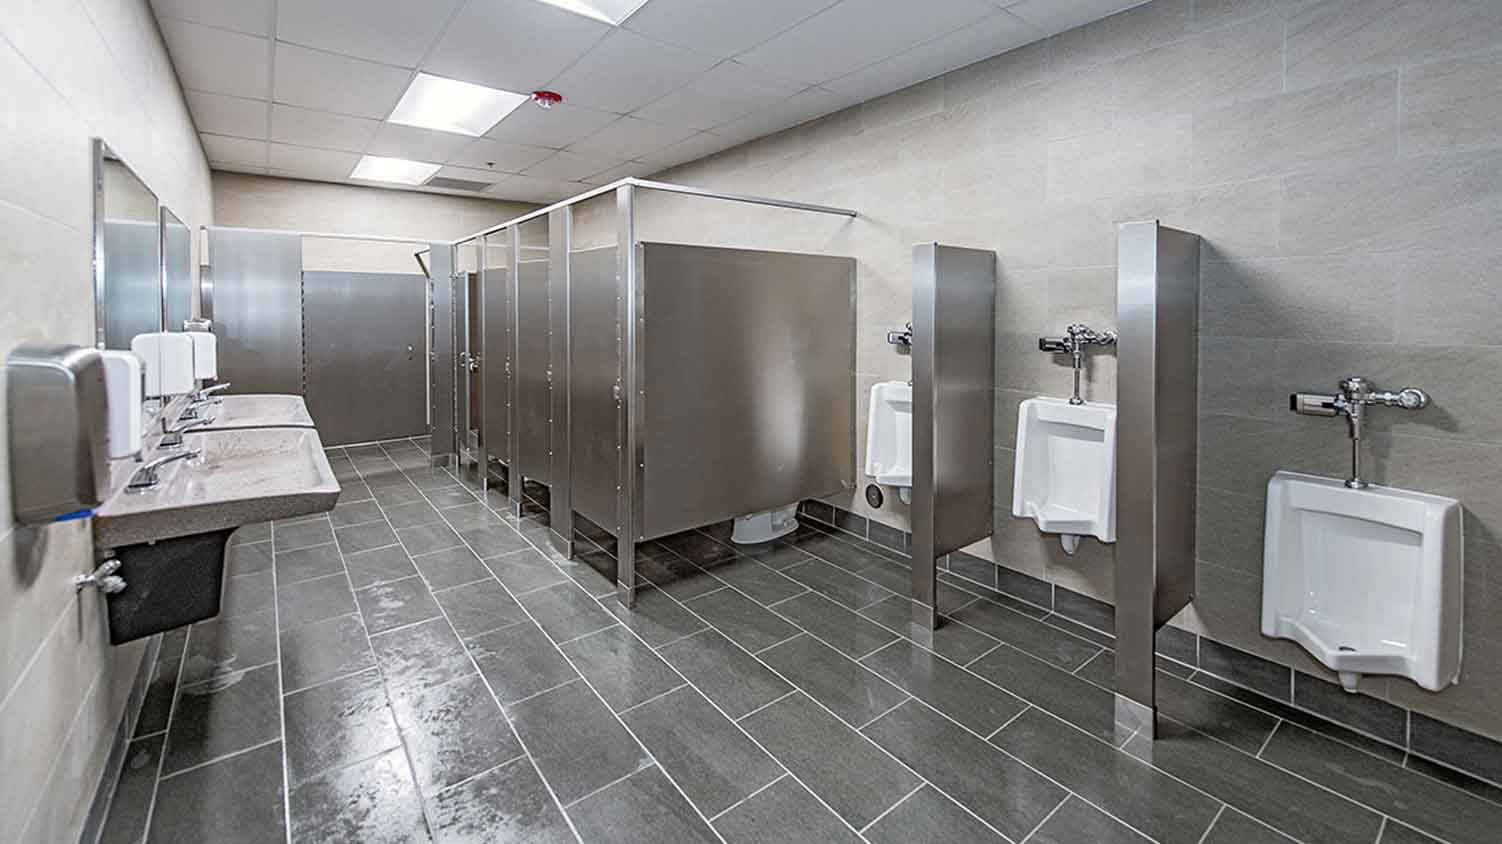 Freshly renovated bathroom with multiple stalls and urinals